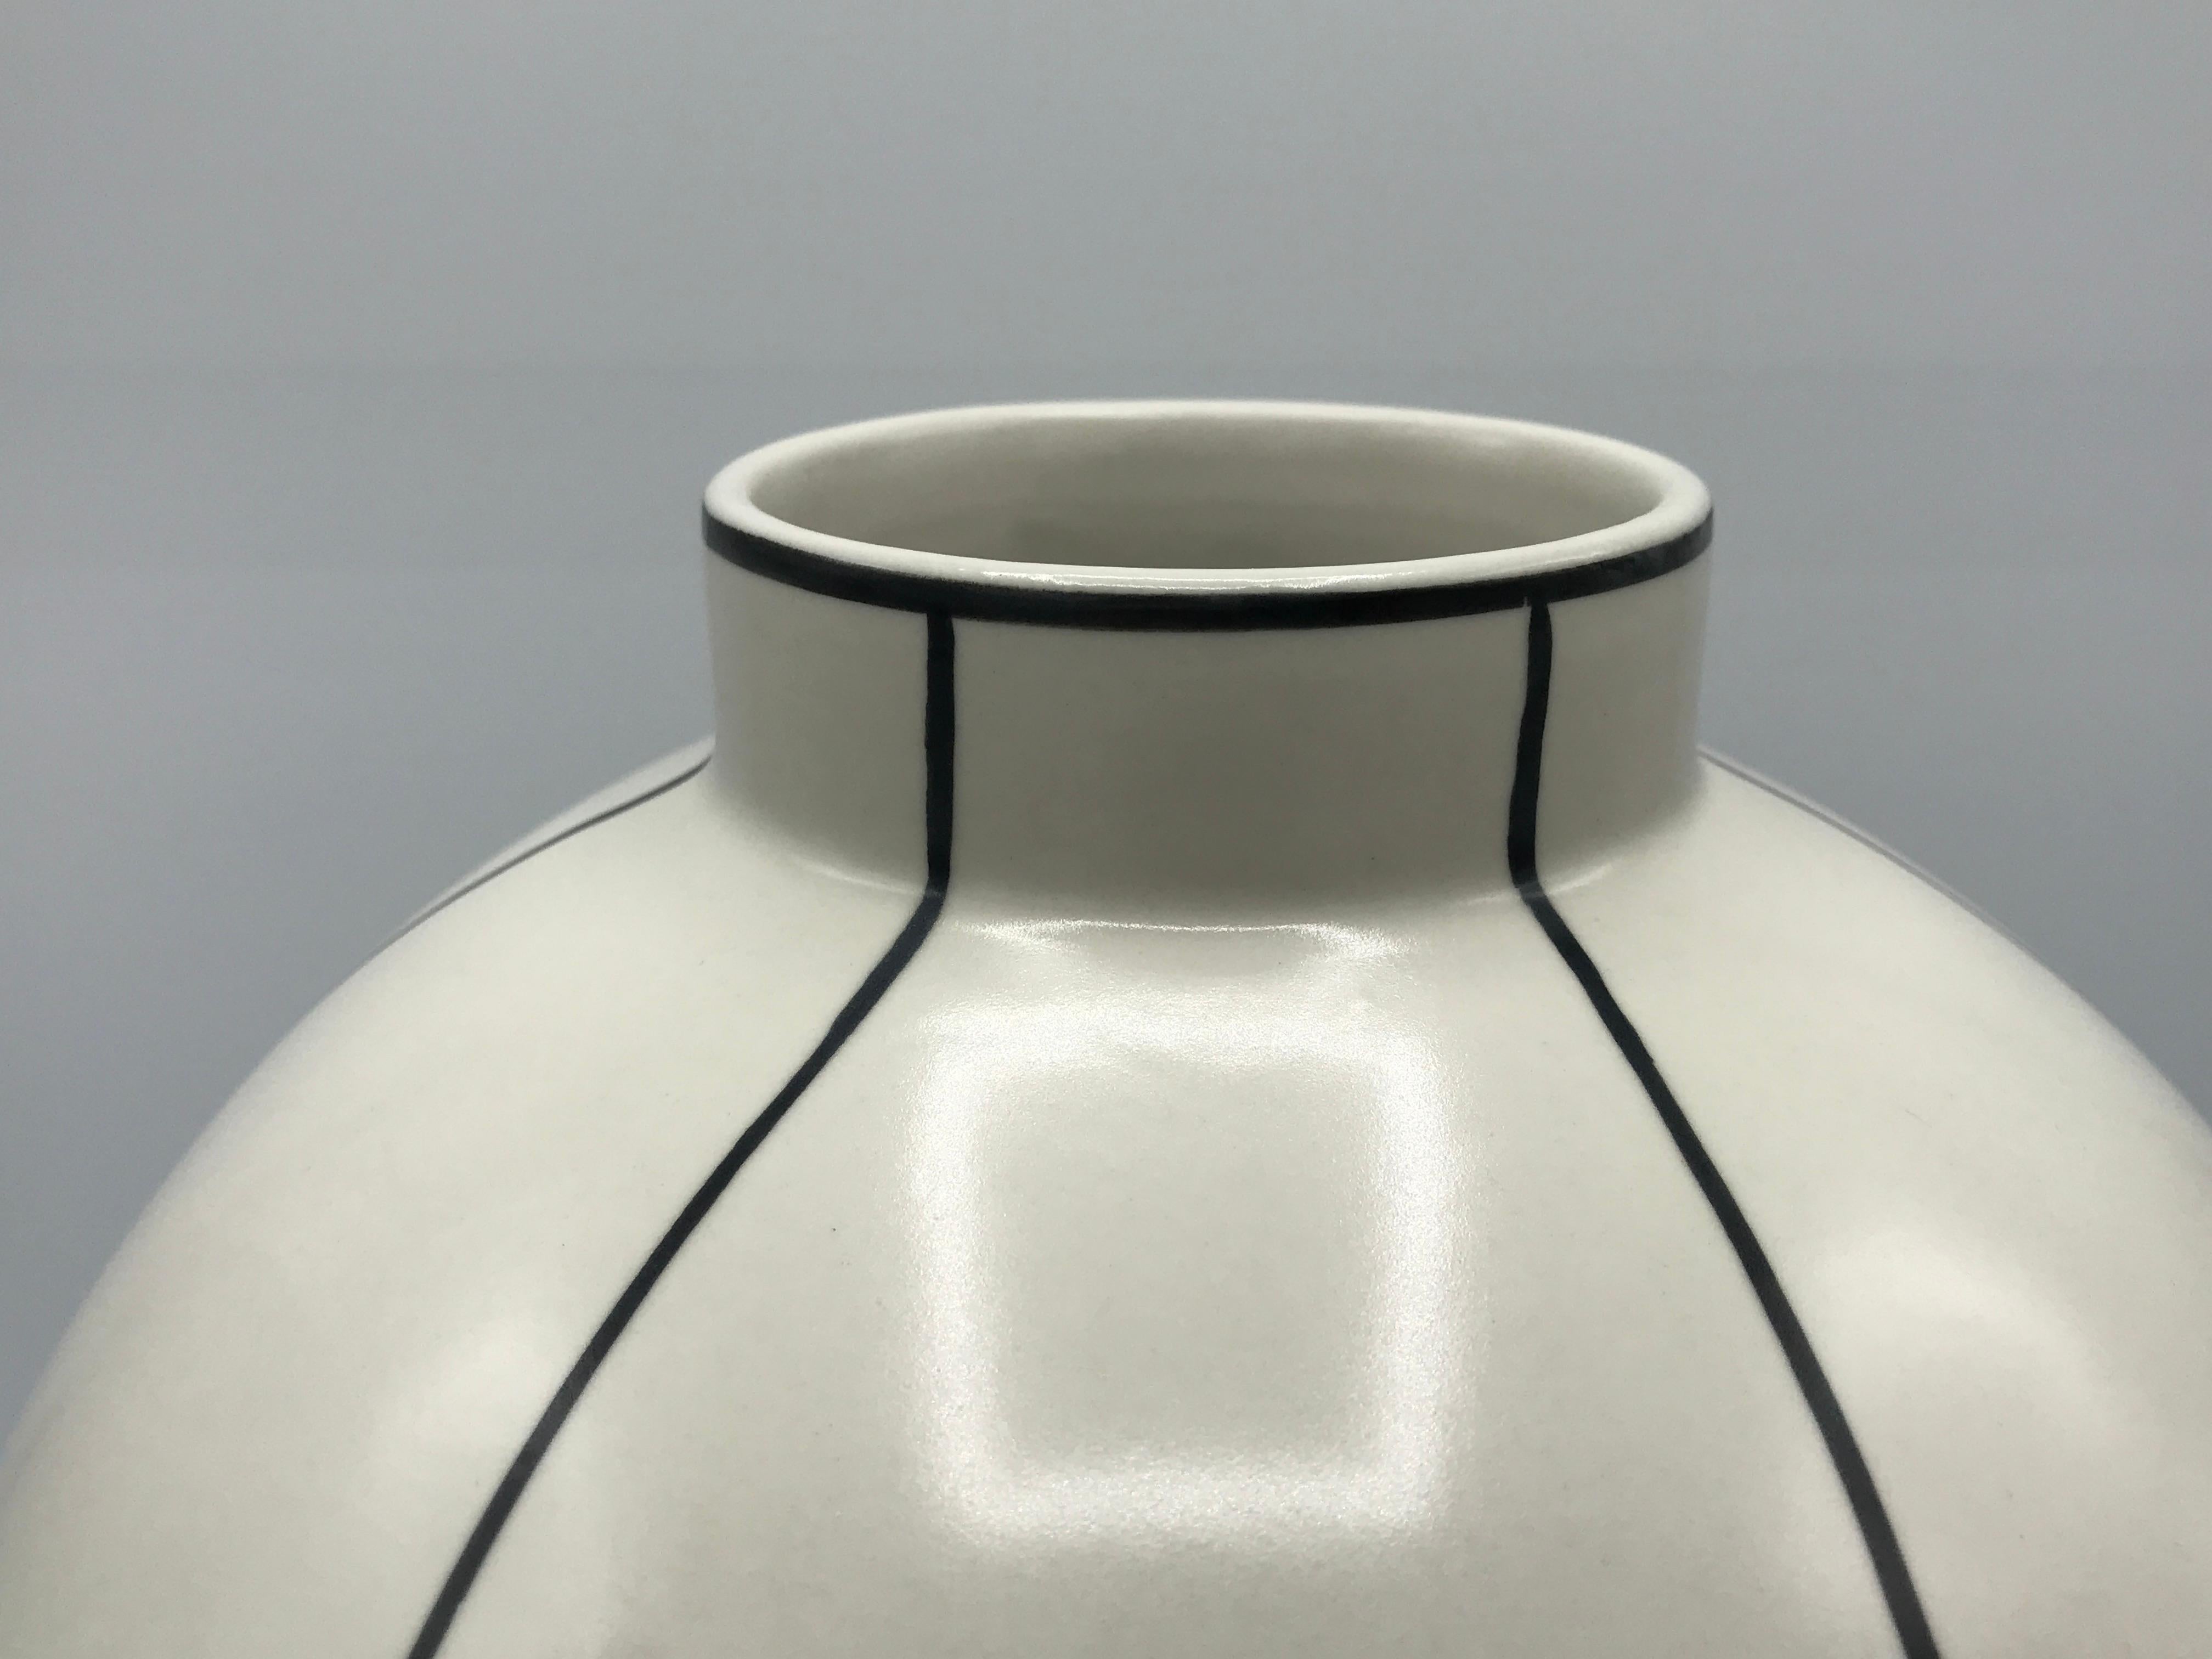 Offered is a stunning, 1980s Bitossi-style modern graphite gray and white ceramic vase. The piece has a modern minimalistic geometric motif allover, with a repetitive flipping of the half-circles. Heavy, weighs 5.5lbs.